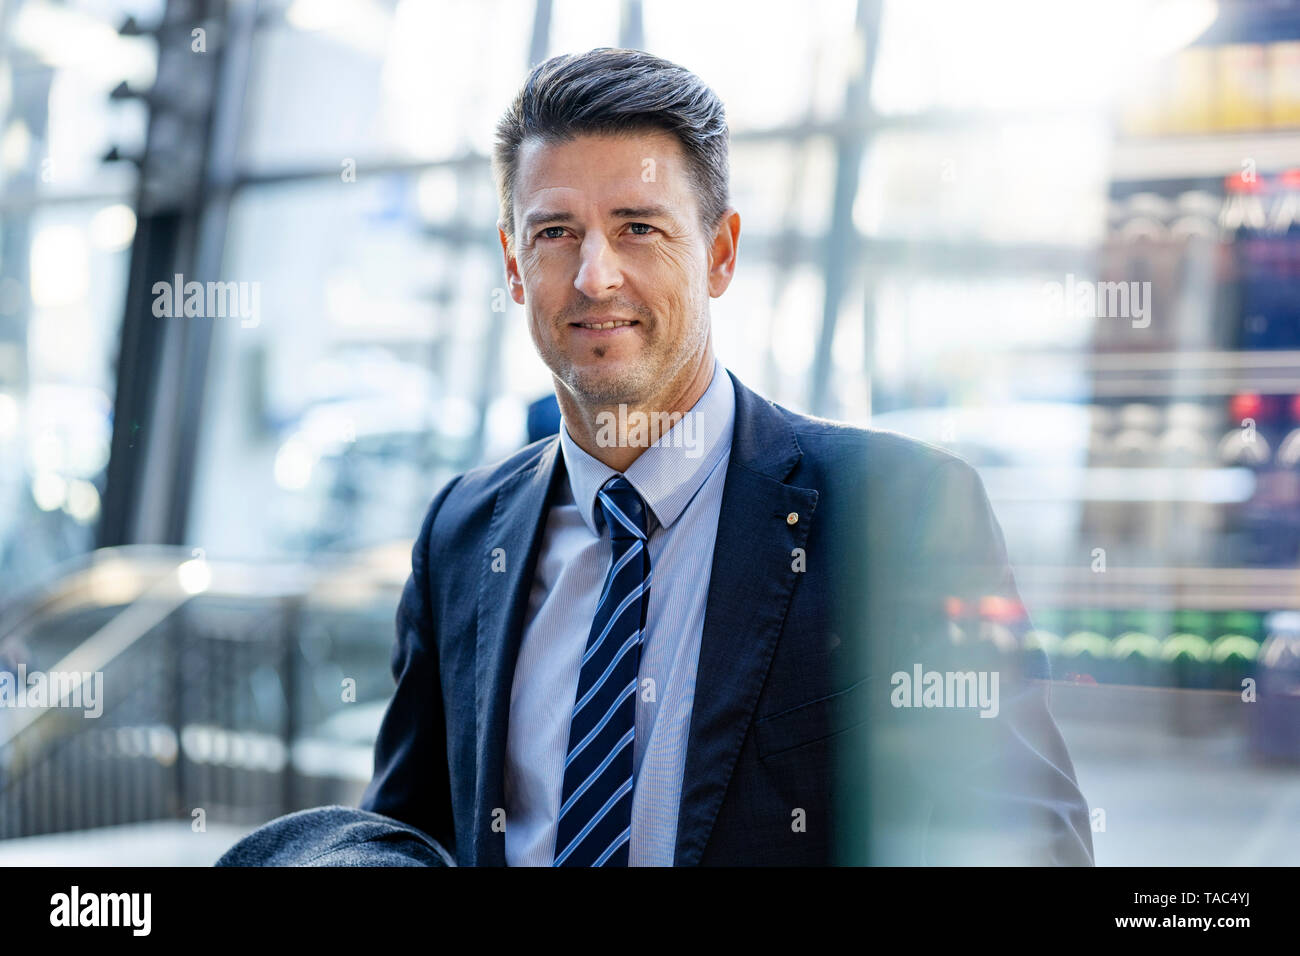 Portrait of smiling businessman on the move Stock Photo